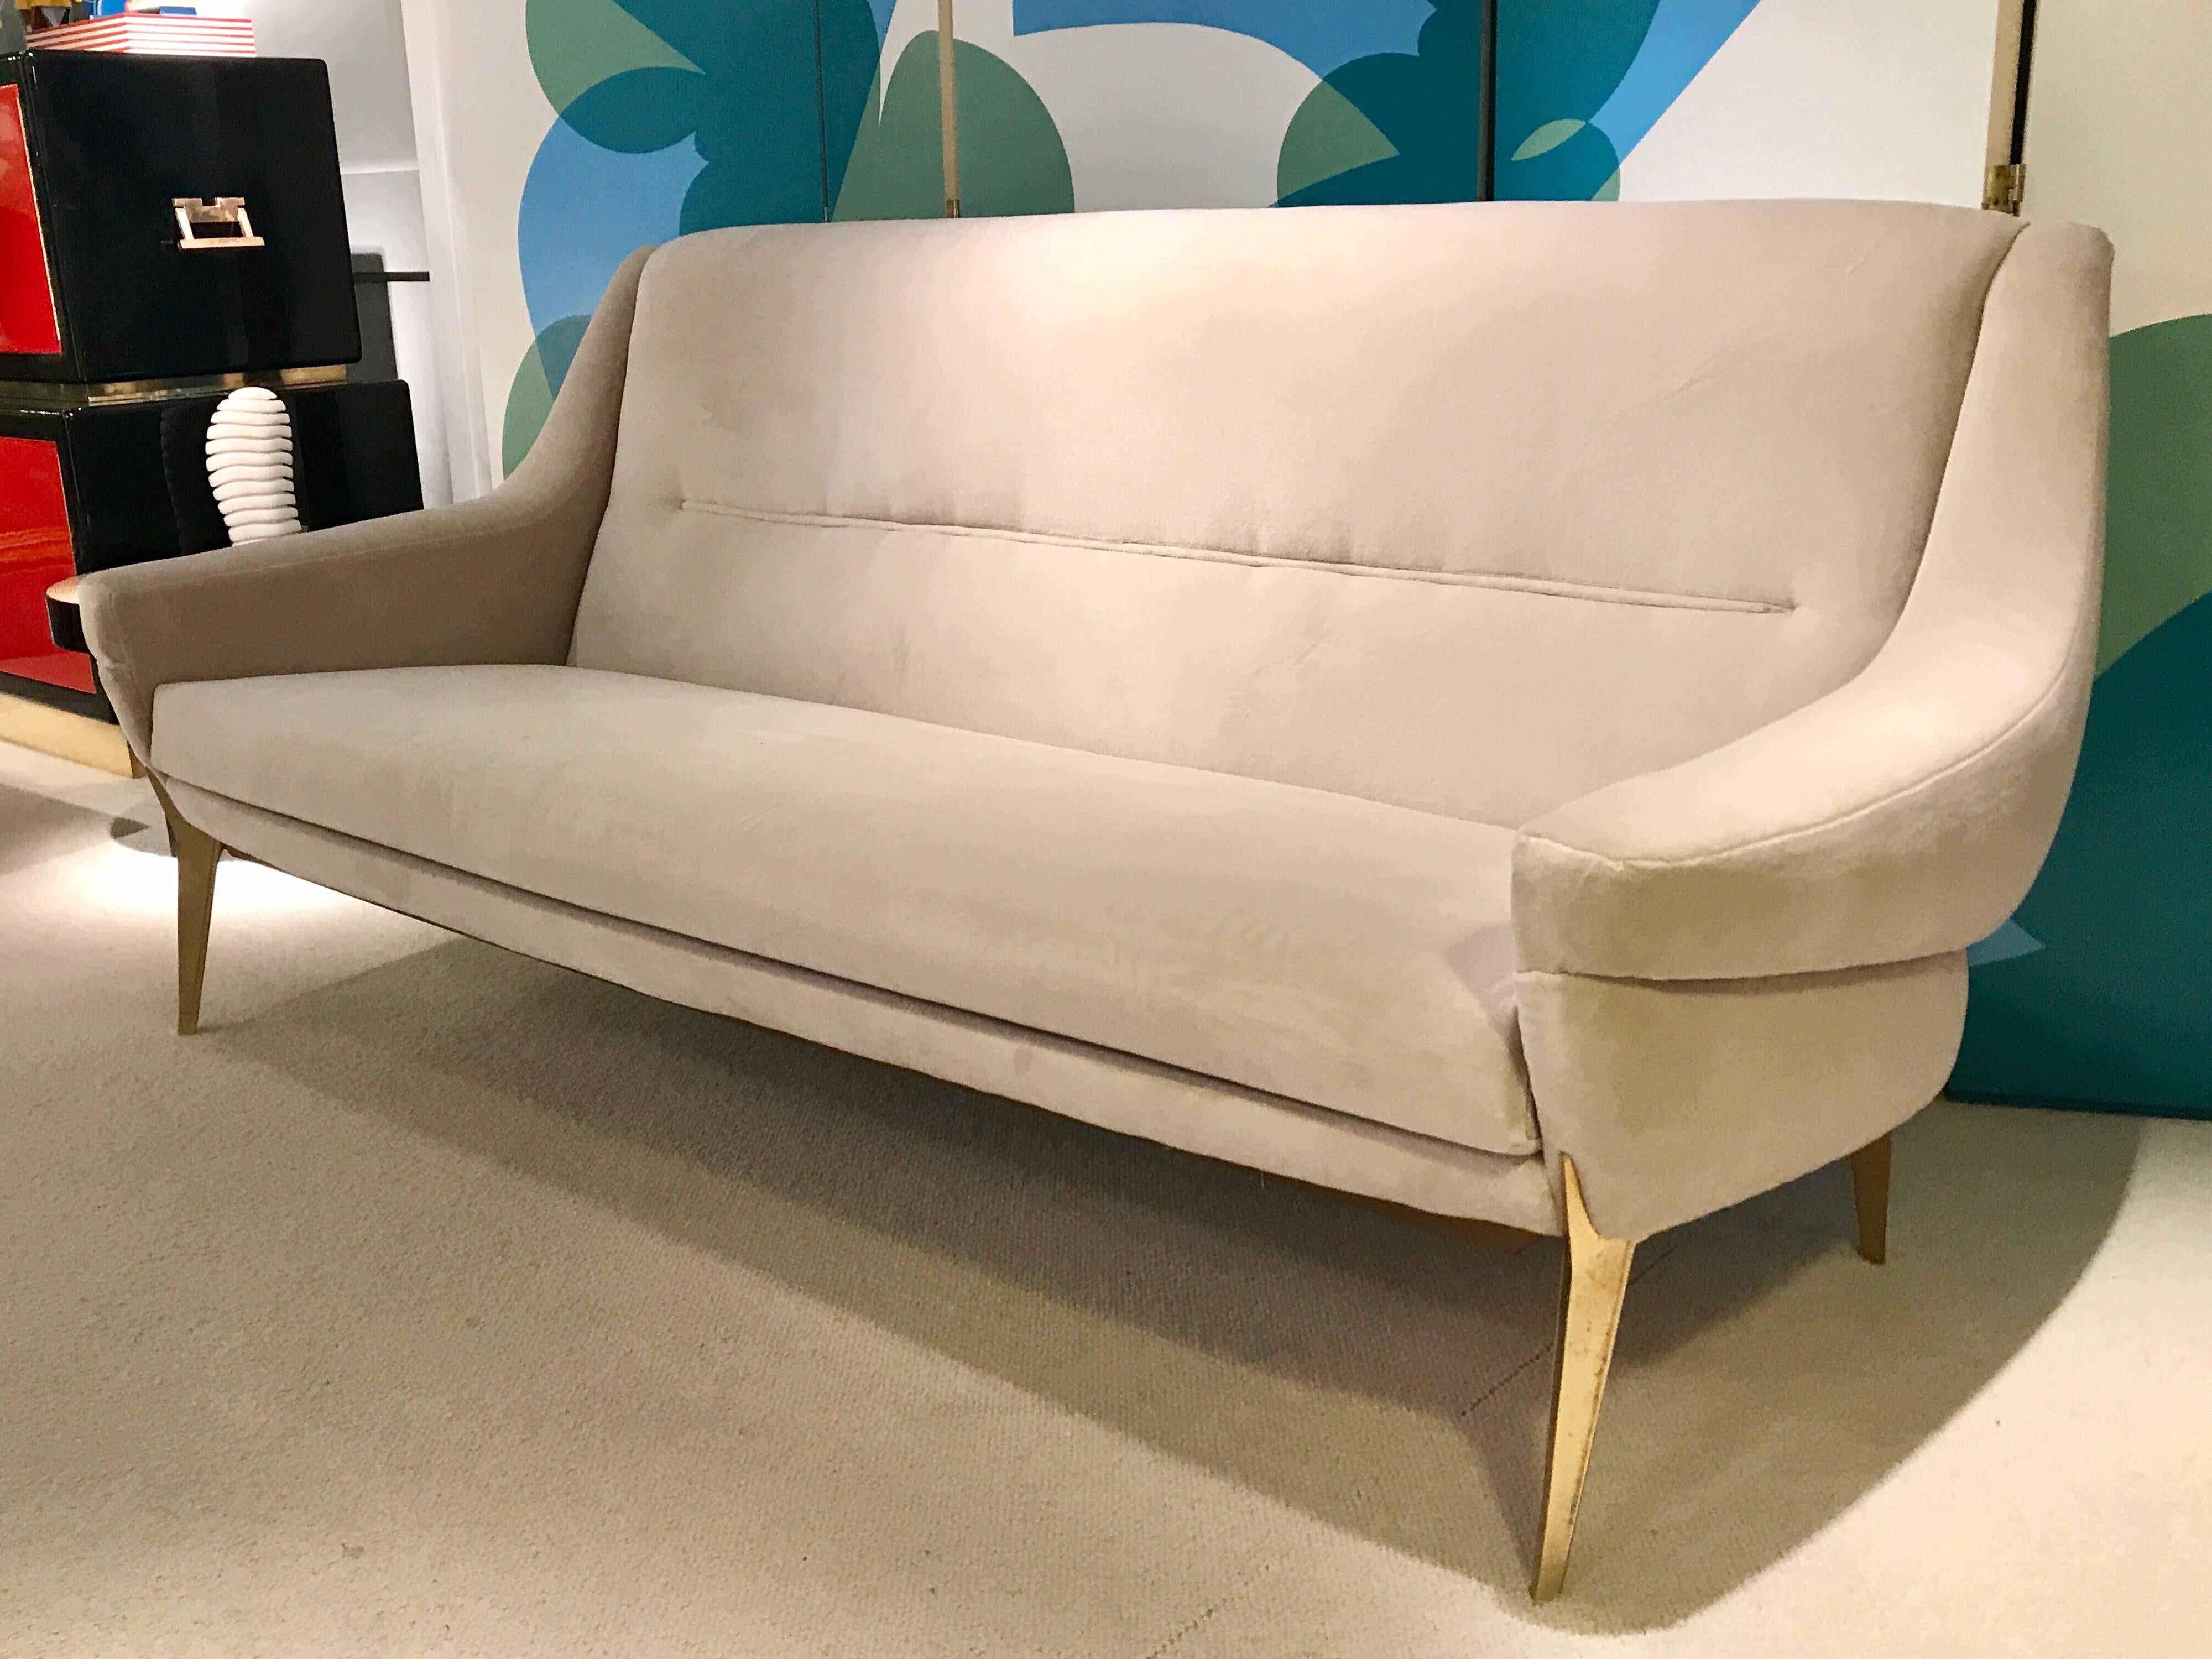 Charles Ramos three-seat sofa with gilt metal legs covered with Pierre Frey velvet.
Perfect condition.